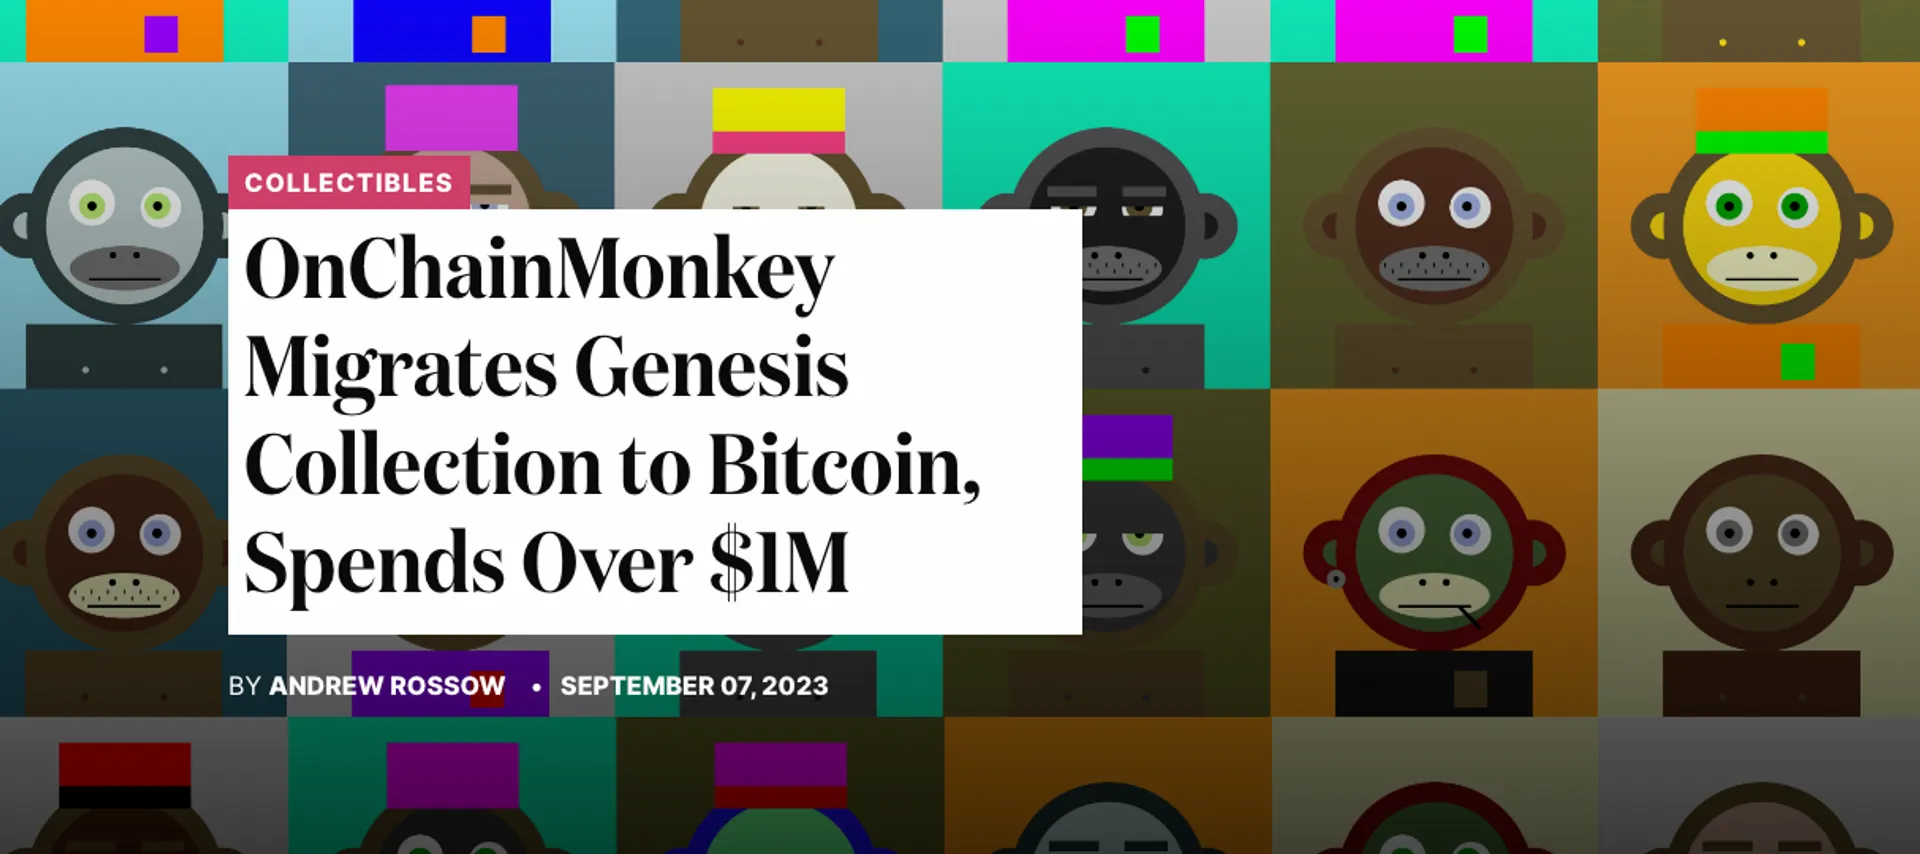 🔥 BREAKING! OnChainMonkey Migrates Genesis Collection to Bitcoin, Spends Over $1M 🔥 !RISE  https://nftnow.com/collectibles/onchainmonkey-migrates-genesis-nft-collection-to-bitcoin/

Here’s the deal folks. Bitcoin is making waves in 2023 and 
OnChainMonkey and Metagood are not only right in the middle of the mix, but leading the way.

Here’s why I believe $BTC might is the next big thing for our personal, business and financial futures.

***No financial or investment advice is being given***

No One's in Charge Here!

Imagine a world where no single person, company, or even a country controls your digital assets, artifacts and currency. That's Bitcoin for you. It's a decentralized technology, meaning it's not owned or controlled by anyone. It's like having a global currency without a central bank.

Power to the People

Remember when only banks and big corporations had control over money and lending? Did you know that 1.3B people on the planet don't have access to financial buying/selling/banking tools and resources?

Bitcoin is changing that. It democratizes finance and banking. This means that anyone, anywhere, can access and use digital currency and secure permanent ownership rights, without needing a bank or courthouse. It's like everyone having their own personal banking and life/business building tool in their pocket.

Stay Ahead of the Game

Inflation, often described as the silent thief, gradually diminishes the purchasing power of our money. Let's break it down with an example: if you had $100 today, but due to inflation, its value decreases by 2% annually, in 10 years, it would have the buying power of roughly $82. In 25 years, that value would drop to around $60, and in a staggering 100 years, it would be a mere $13.68! This means the same $100 would buy significantly less as time goes on.

Now, enter Bitcoin. As a decentralized digital currency with a finite supply (only 21 million bitcoins will ever be mined), its value isn't as susceptible to dilution. While traditional currencies can be printed in vast amounts by governments, leading to more money in circulation and potentially higher prices for goods and services, Bitcoin's capped supply and growing demand mean it could potentially retain or even increase its value over time. This unique characteristic positions Bitcoin as a potential safeguard against the relentless bite of inflation.

Big Money is Coming

In 2023 and moving forward, new rules are expected to be in place. These rules will make it easier for big institutions and pensions (think huge investment funds) to invest in Bitcoin. Plus, everyday folks like us will soon be able to add Bitcoin to our investment mix through things like EFTs. Imagine the boost when billions of dollars flow into the Bitcoin world!

The Magic of Bitcoin Halving

Next year, we're gearing up for a significant event in the Bitcoin world called "halving." This is when the reward for mining new bitcoins gets cut in half. Why is this a big deal? Well, it reduces the number of new bitcoins entering the market. With fewer bitcoins being produced and the demand staying strong or even increasing, basic economics tells us that this scarcity can drive up the value. This halving event, combined with Bitcoin's other strengths, could make it an even more attractive asset for investors and everyday folks alike!

The Best of Tech

Ever had a computer or phone glitch and lose all your data? That's a problem Bitcoin doesn't have. Thanks to its blockchain technology, it's super secure. Here's a quick breakdown:

Decentralized Blockchain: A digital ledger that's not stored in one place, making it hard to hack. Bitcoin is the most secure blockchain on the planet.

Recursion & Composability: Fancy terms that mean Bitcoin's newly released protocols and tech can build on itself and work with other systems.

Immutability: Once data is added, it can't be changed. So, no sneaky business!

Provenance: You can trace where every Bitcoin came from. It's like having a history book for your money.

Inscriptions & Ordinals: New 2023 protocols that make Bitcoin even more secure, useful, and efficient.

In short, Bitcoin is a revolution in how we think about digital ownership, global inclusion, and currency. With its advanced tech and quickly growing acceptance, the future looks bright for Bitcoin.

Mitch

PS- Please pay attention to this new tech, especially when combined with AI and the metaverse. Take advantage of the new solutions and opportunities.